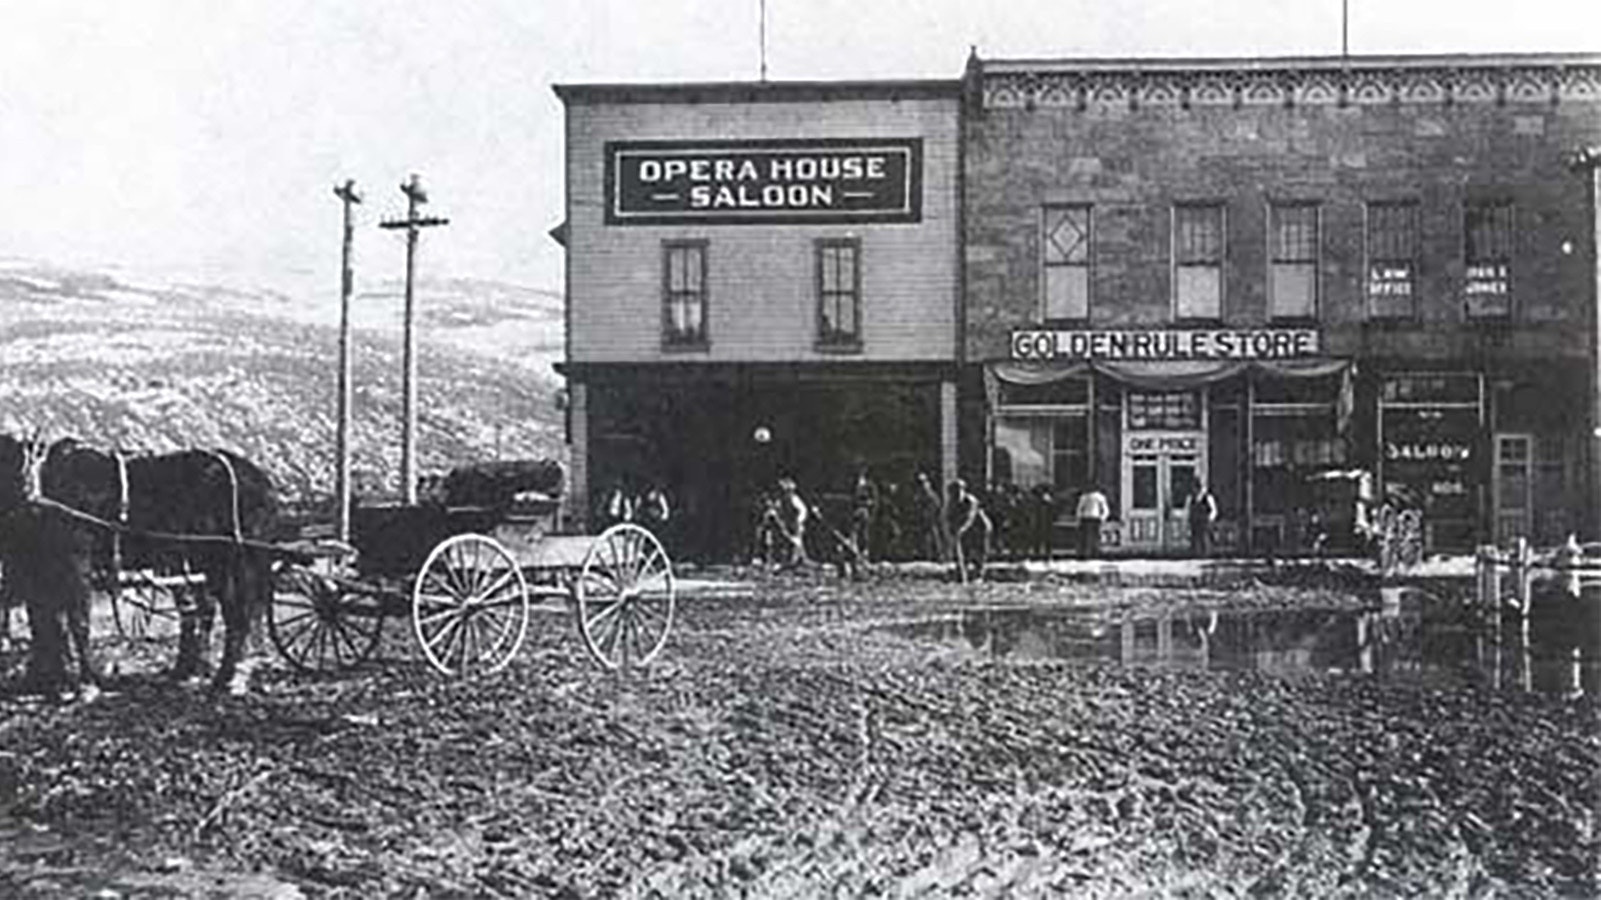 The old Opera House Saloon is one of Kemmerer’s oldest buildings, one of many in a row on Main Street. It was next to James Cash Penney’s Golden Rule Store, a precursor to the JCPenney empire.